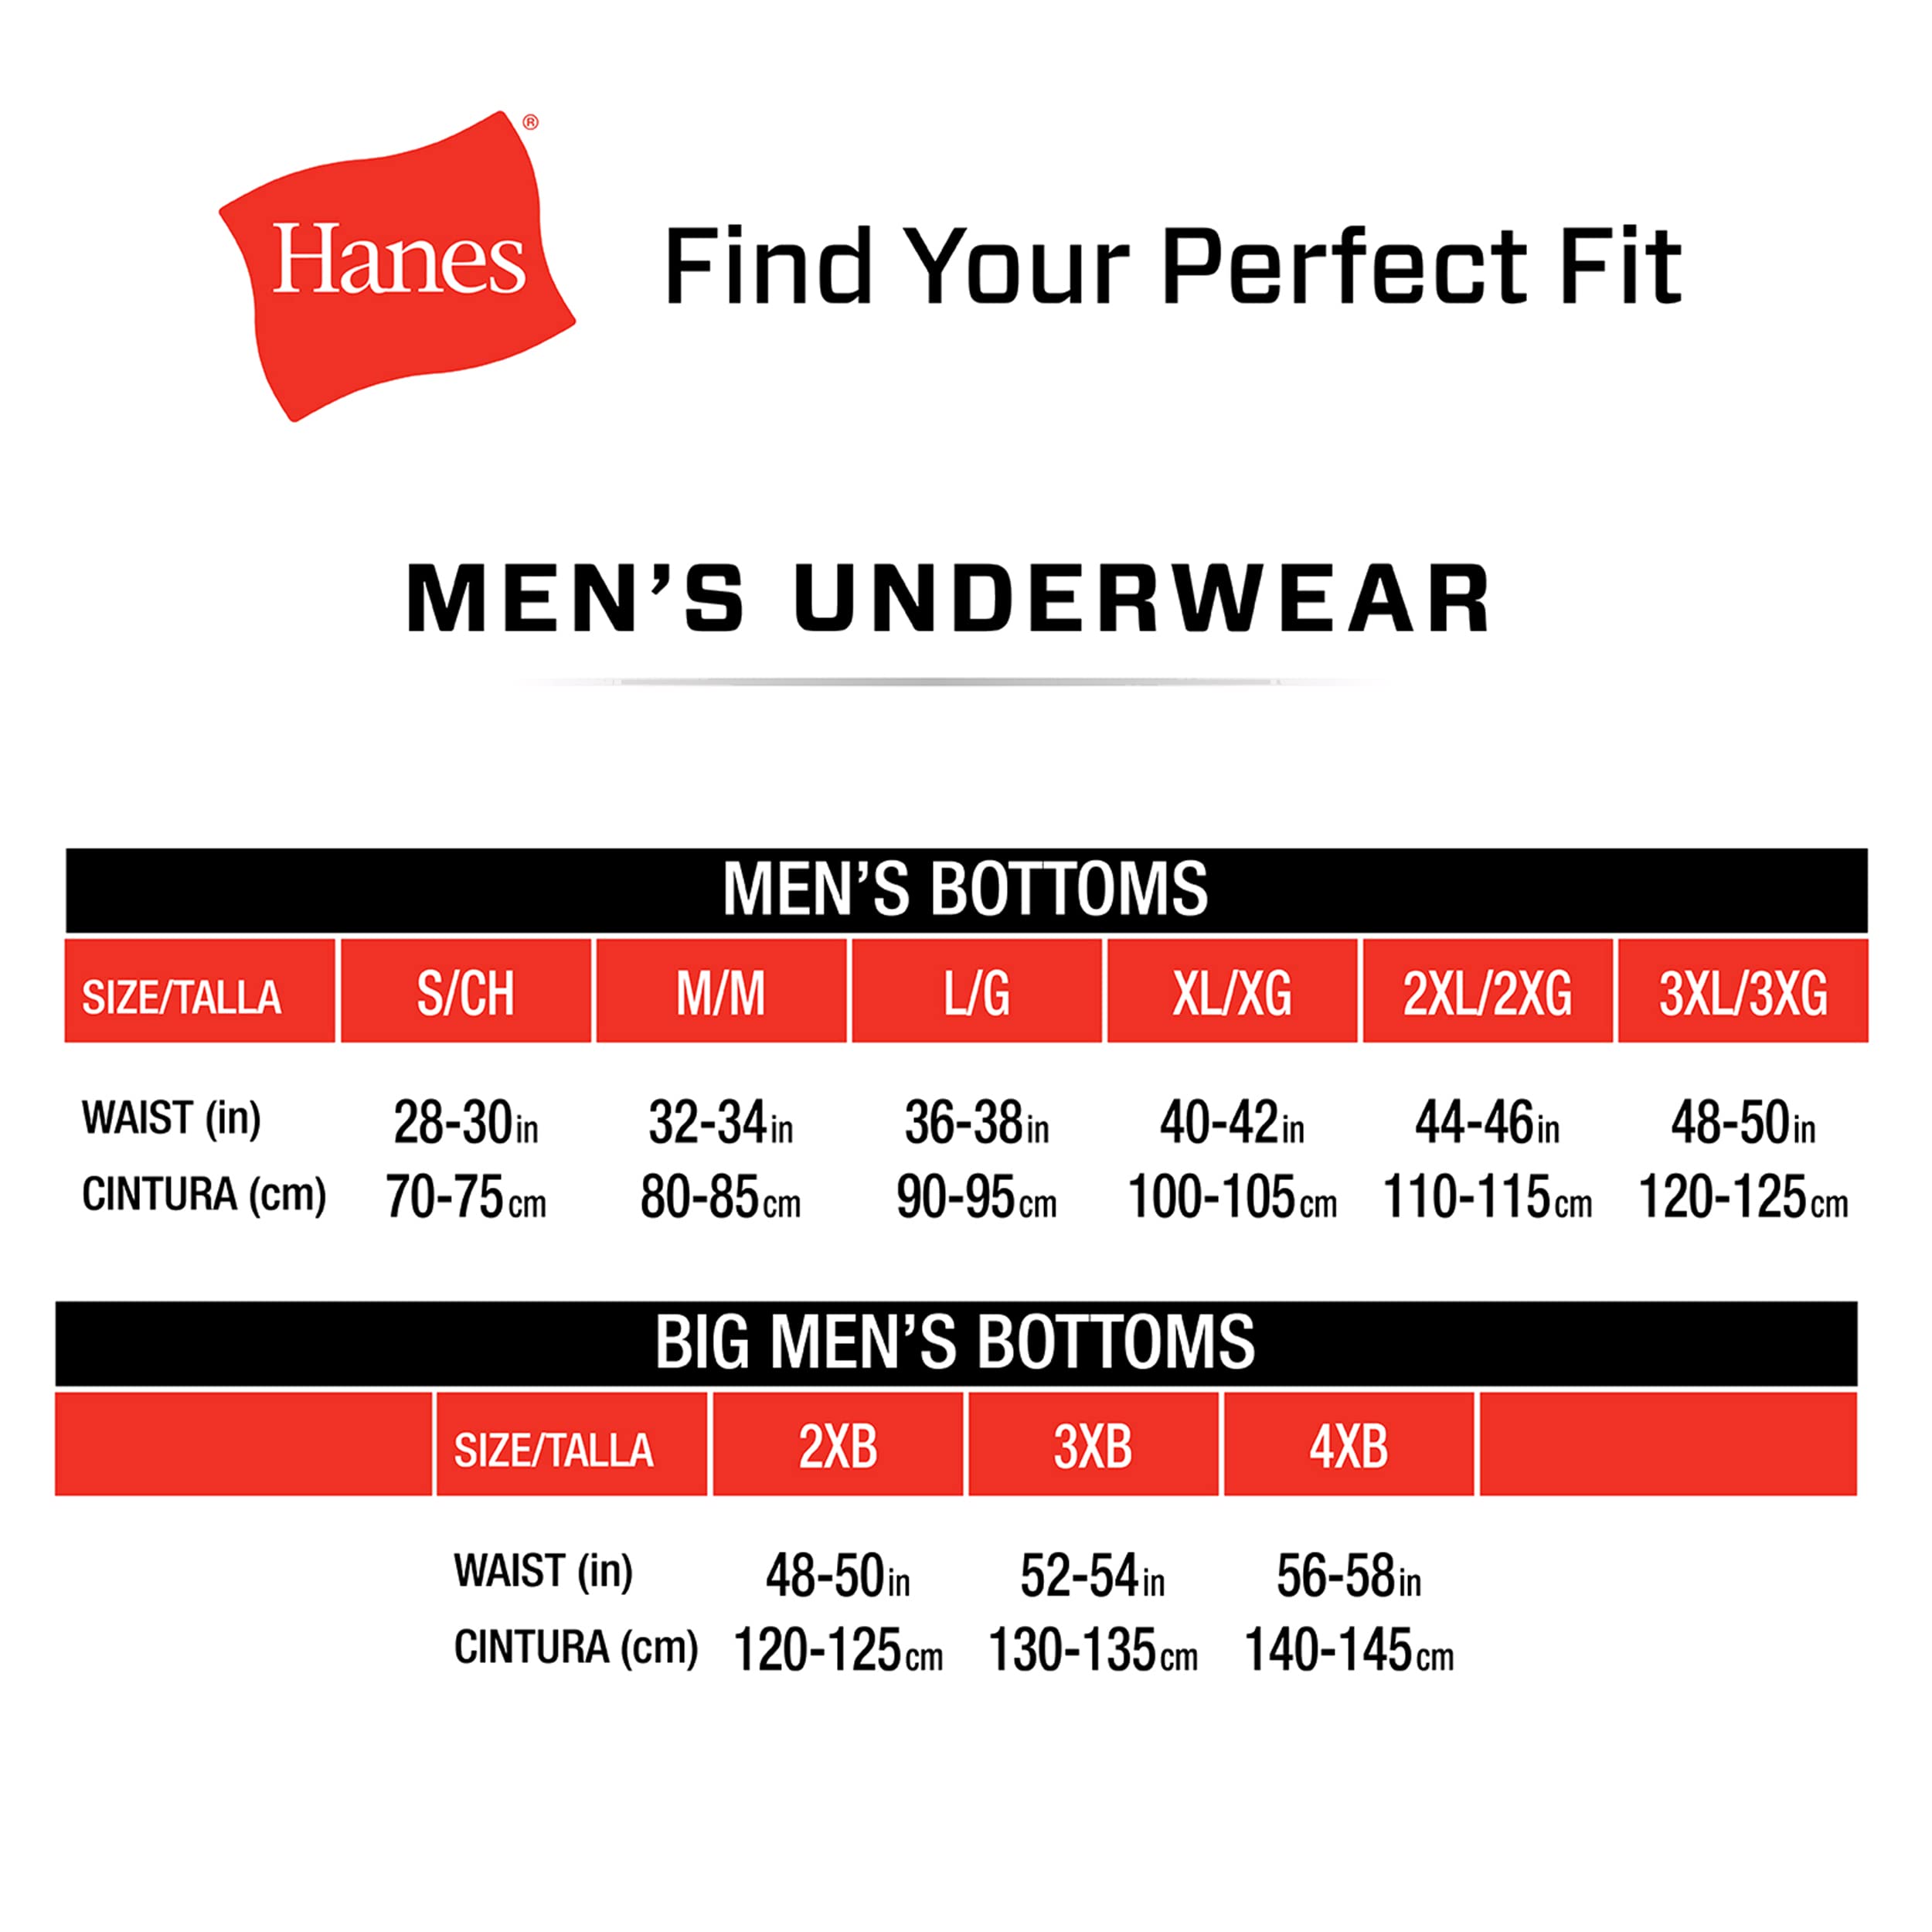 Hanes Men's Pack, Mid-Rise Briefs, Stretch Cotton Underwear, Classic, (Pack of 6) (Colors May Vary), Gray, Large